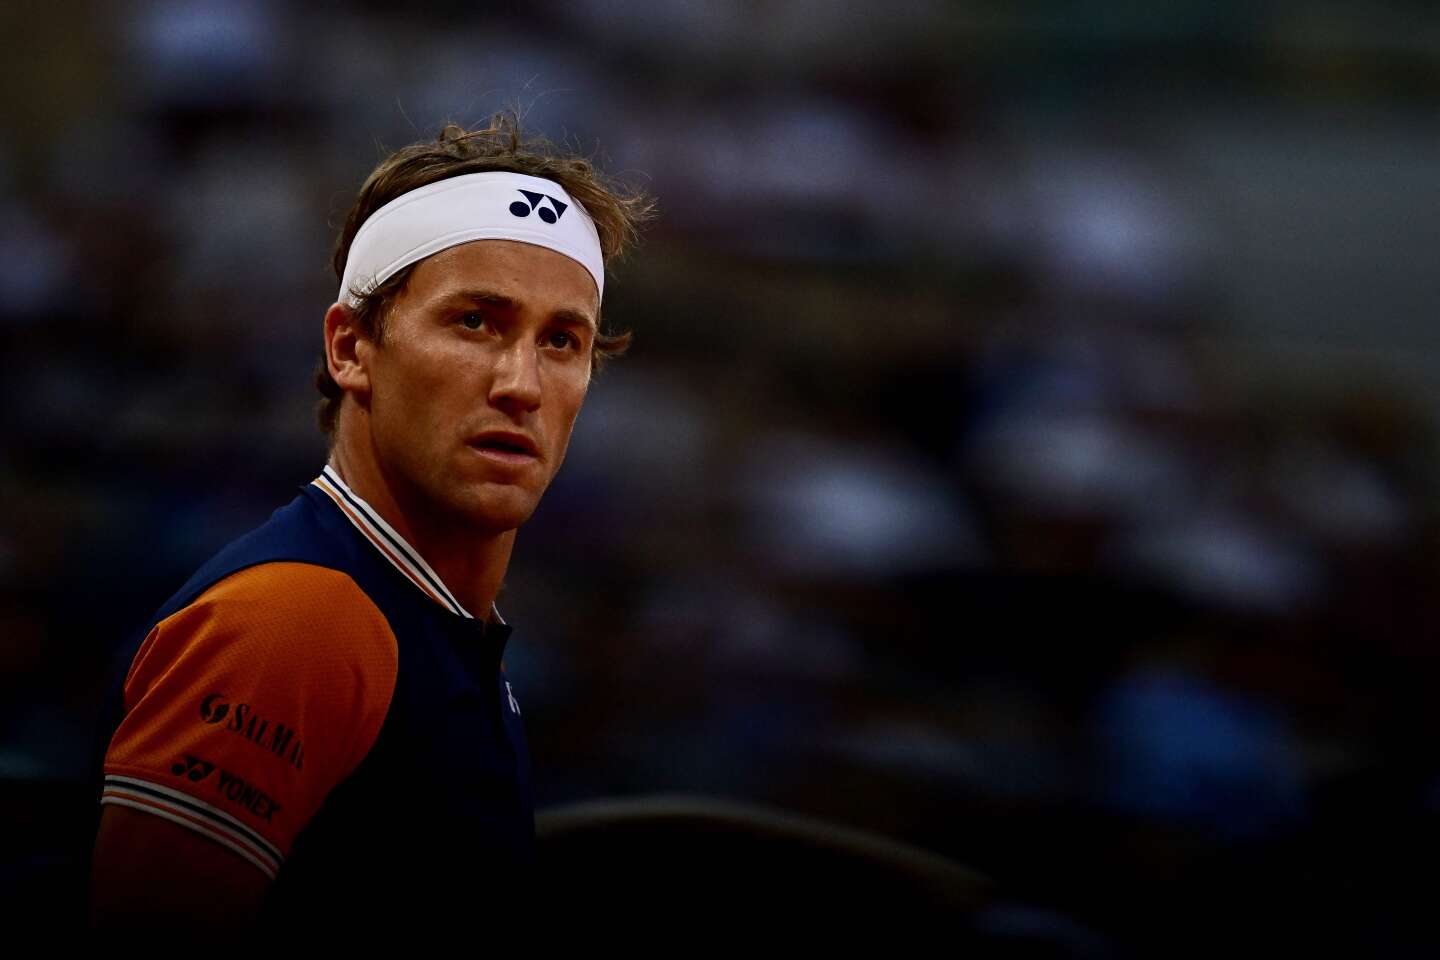 Casper Ruud quietly returns to French Open final